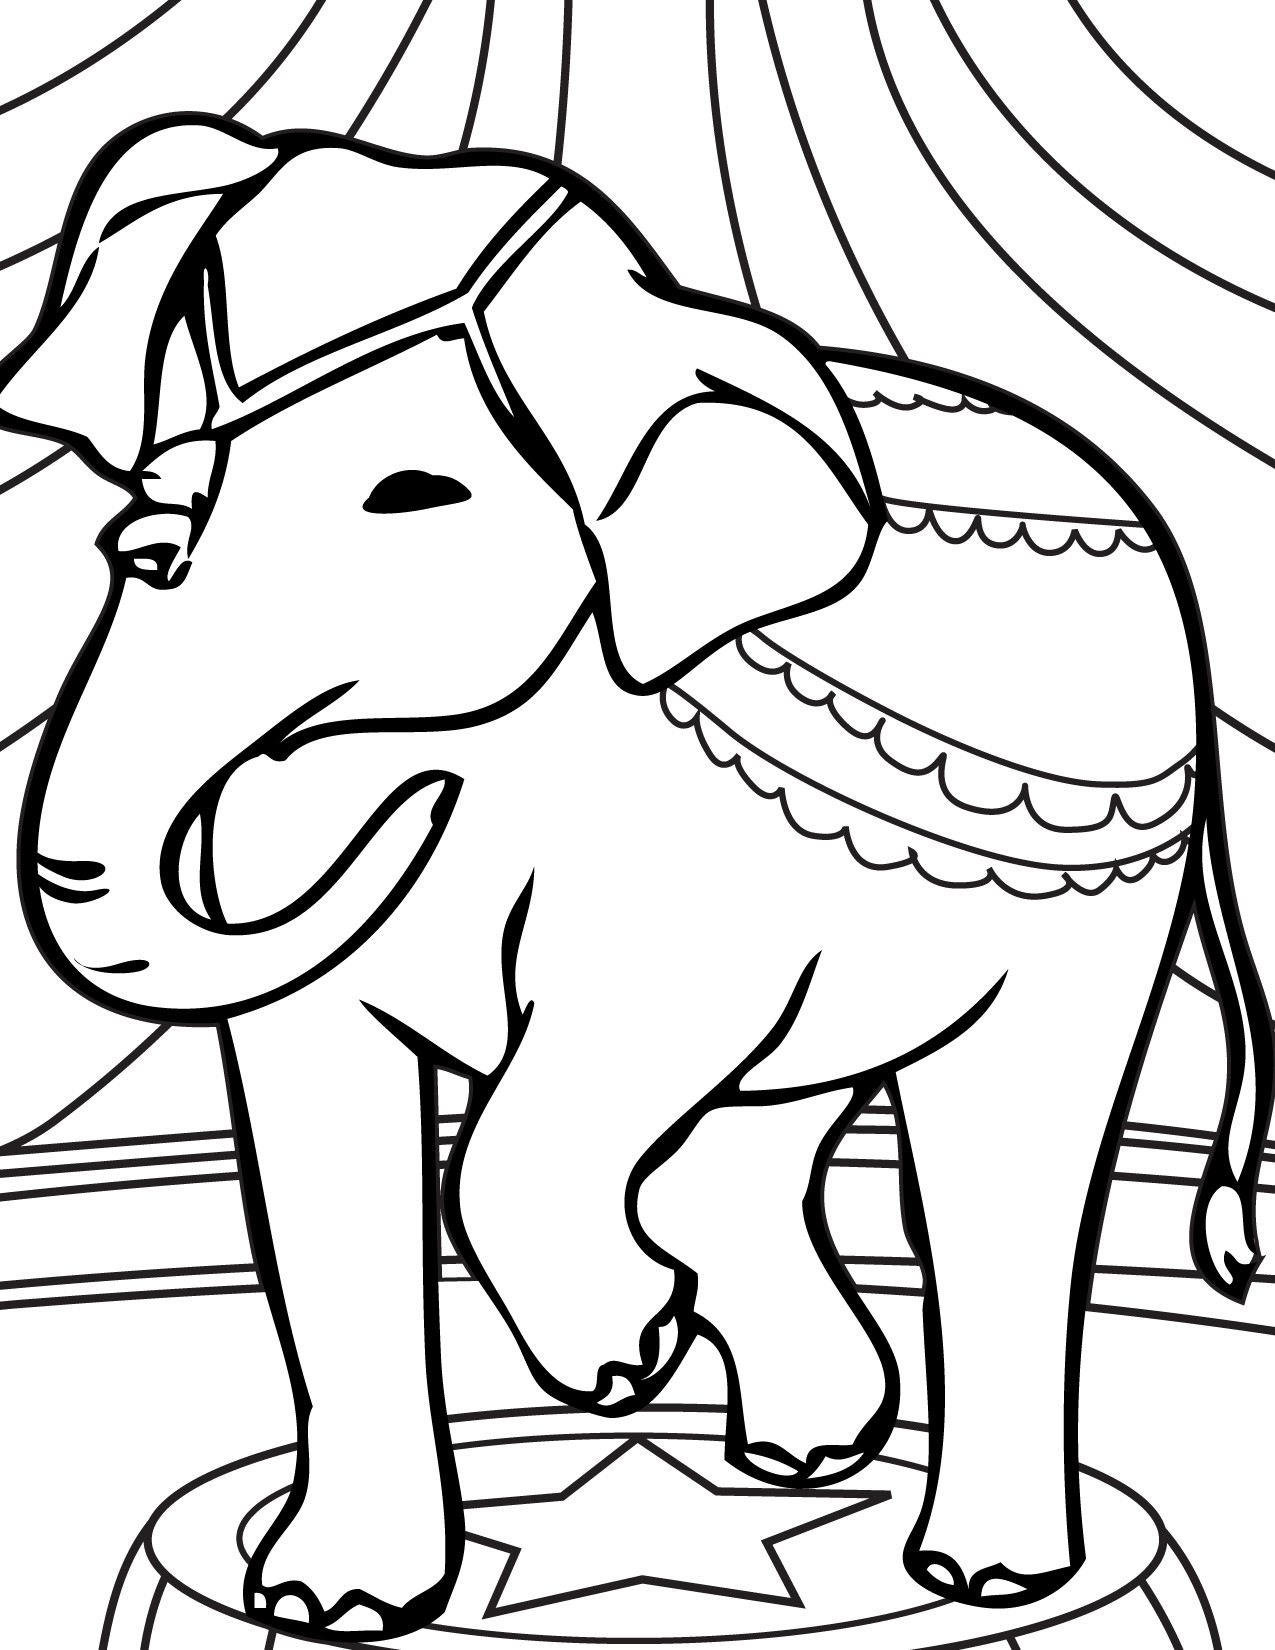 Best ideas about Carnival Coloring Pages For Teens
. Save or Pin circus elephant coloring pages Now.